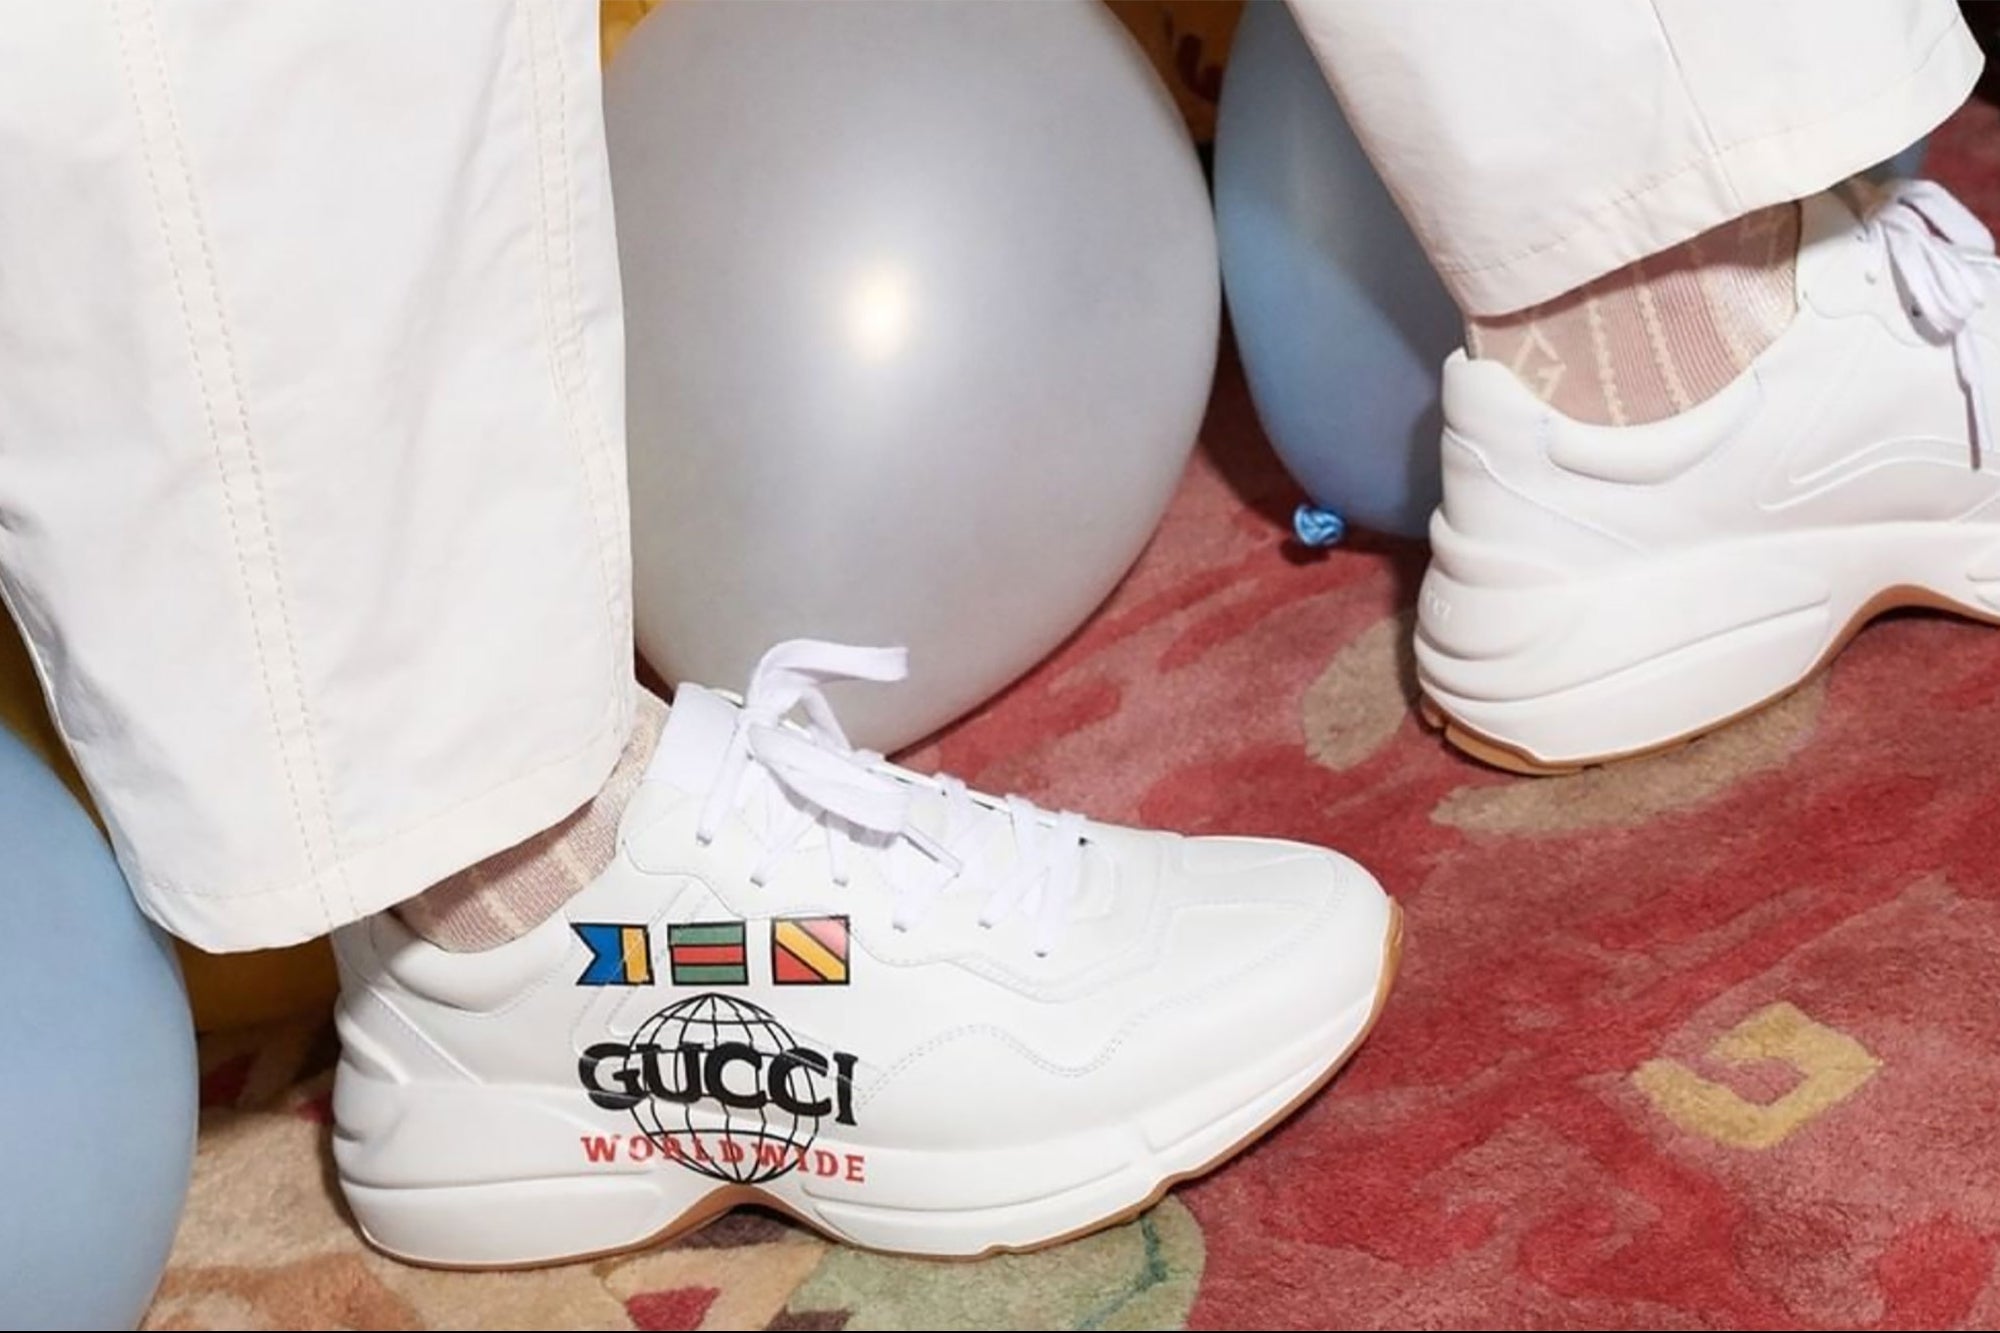 Gucci's New Sneakers are $12 (But They Only Exist Digitally)